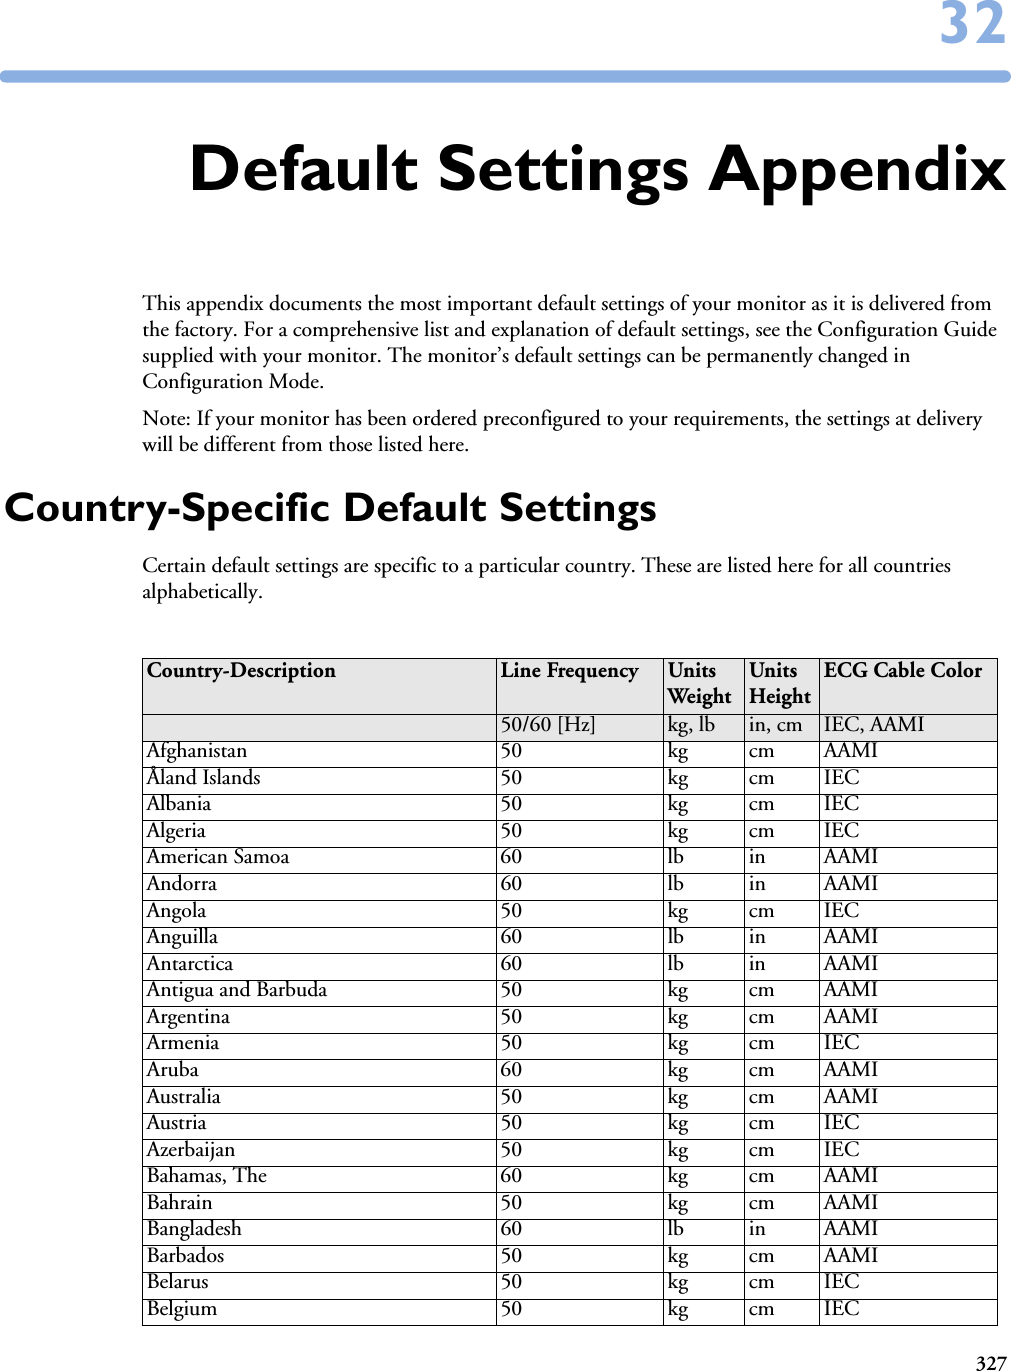 3273232Default Settings AppendixThis appendix documents the most important default settings of your monitor as it is delivered from the factory. For a comprehensive list and explanation of default settings, see the Configuration Guide supplied with your monitor. The monitor’s default settings can be permanently changed in Configuration Mode. Note: If your monitor has been ordered preconfigured to your requirements, the settings at delivery will be different from those listed here. Country-Specific Default SettingsCertain default settings are specific to a particular country. These are listed here for all countries alphabetically.Country-Description Line Frequency UnitsWeightUnitsHeightECG Cable Color50/60 [Hz] kg, lb in, cm IEC, AAMIAfghanistan 50 kg cm AAMIÅland Islands 50 kg cm IECAlbania 50 kg cm IECAlgeria 50 kg cm IECAmerican Samoa 60 lb in AAMIAndorra 60 lb in AAMIAngola 50 kg cm IECAnguilla 60 lb in AAMIAntarctica 60 lb in AAMIAntigua and Barbuda 50 kg cm AAMIArgentina 50 kg cm AAMIArmenia 50 kg cm IECAruba 60 kg cm AAMIAustralia 50 kg cm AAMIAustria 50 kg cm IECAzerbaijan 50 kg cm IECBahamas, The 60 kg cm AAMIBahrain 50 kg cm AAMIBangladesh 60 lb in AAMIBarbados 50 kg cm AAMIBelarus 50 kg cm IECBelgium 50 kg cm IEC